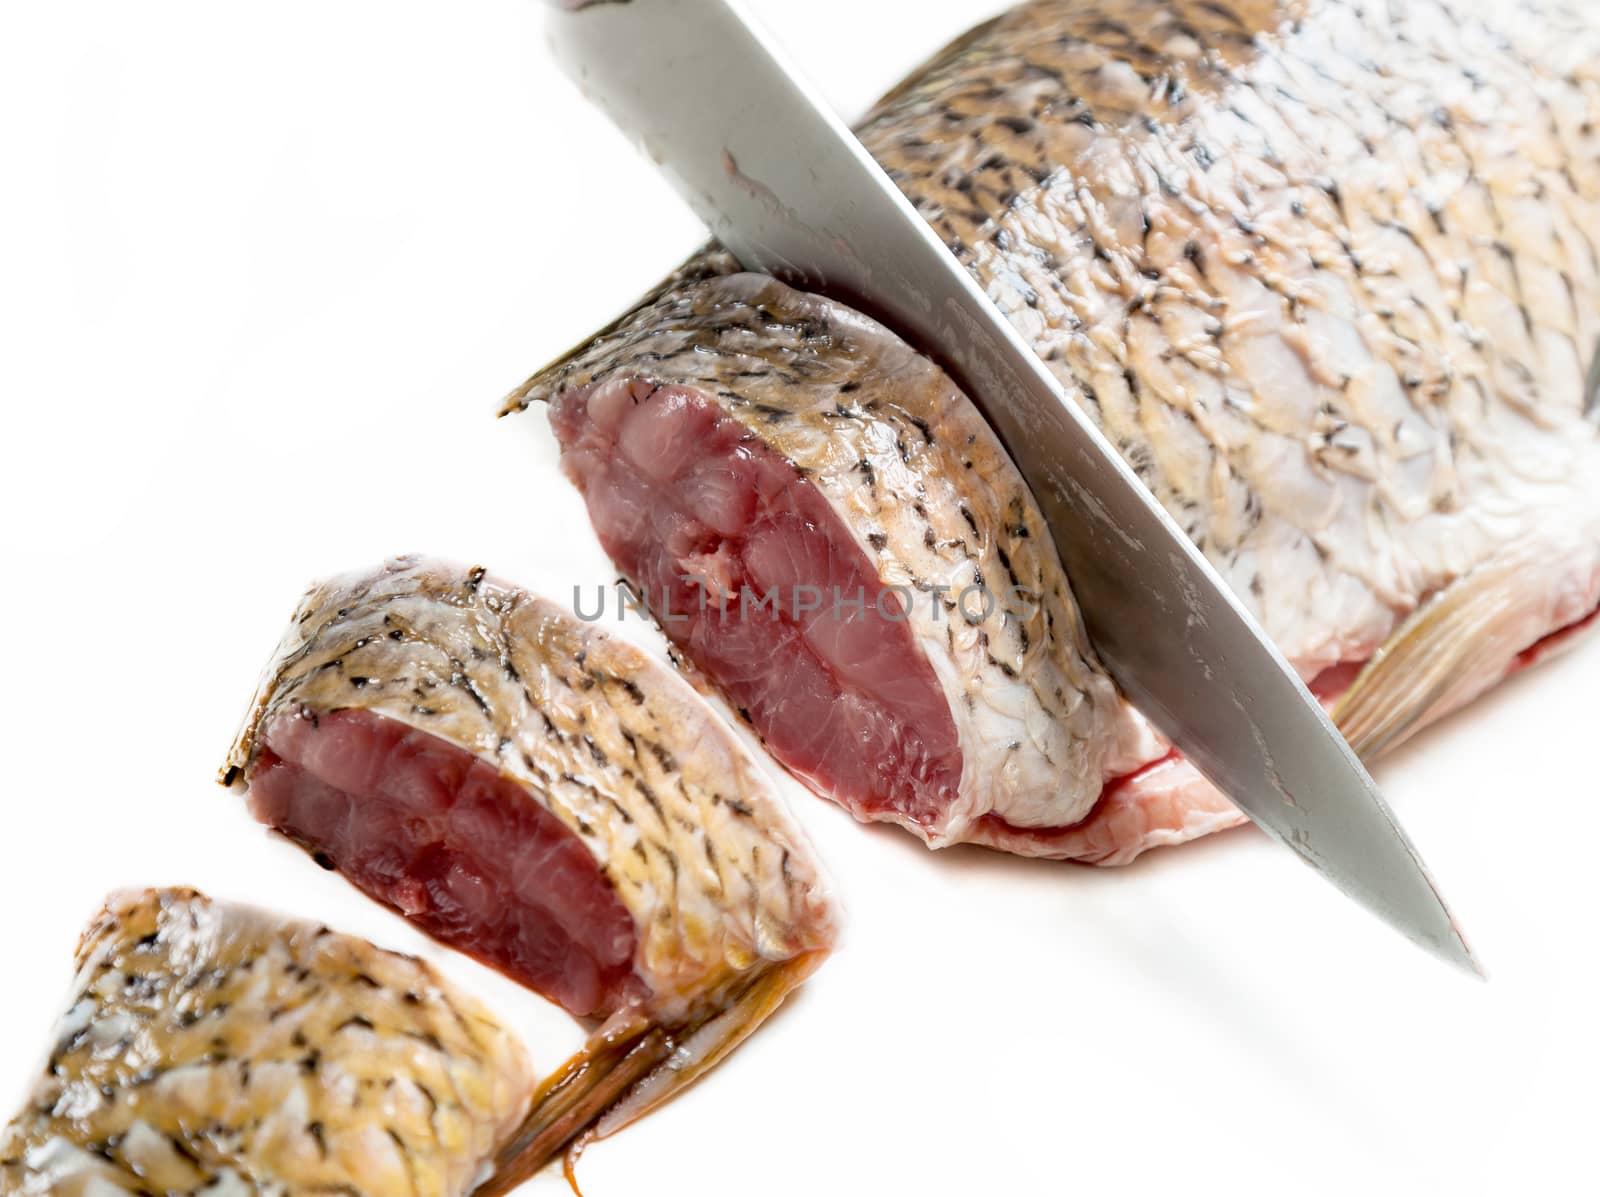 carp fish sliced with a knife on a white background isolated